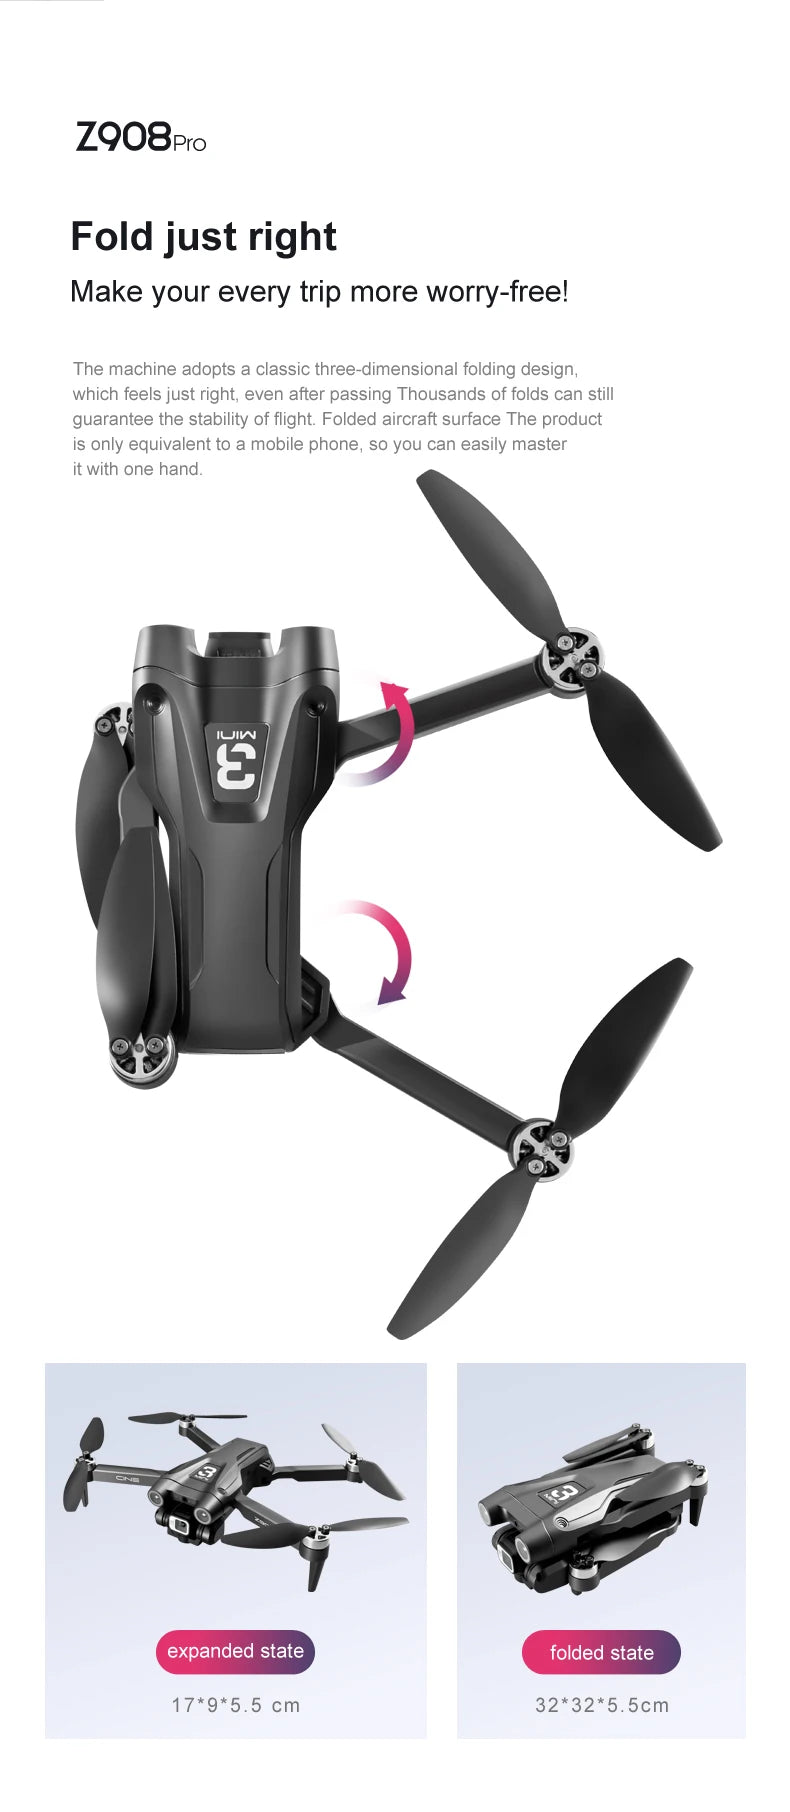 Z908 MAX Drone, z908pro fold just right makes your every trip more worry